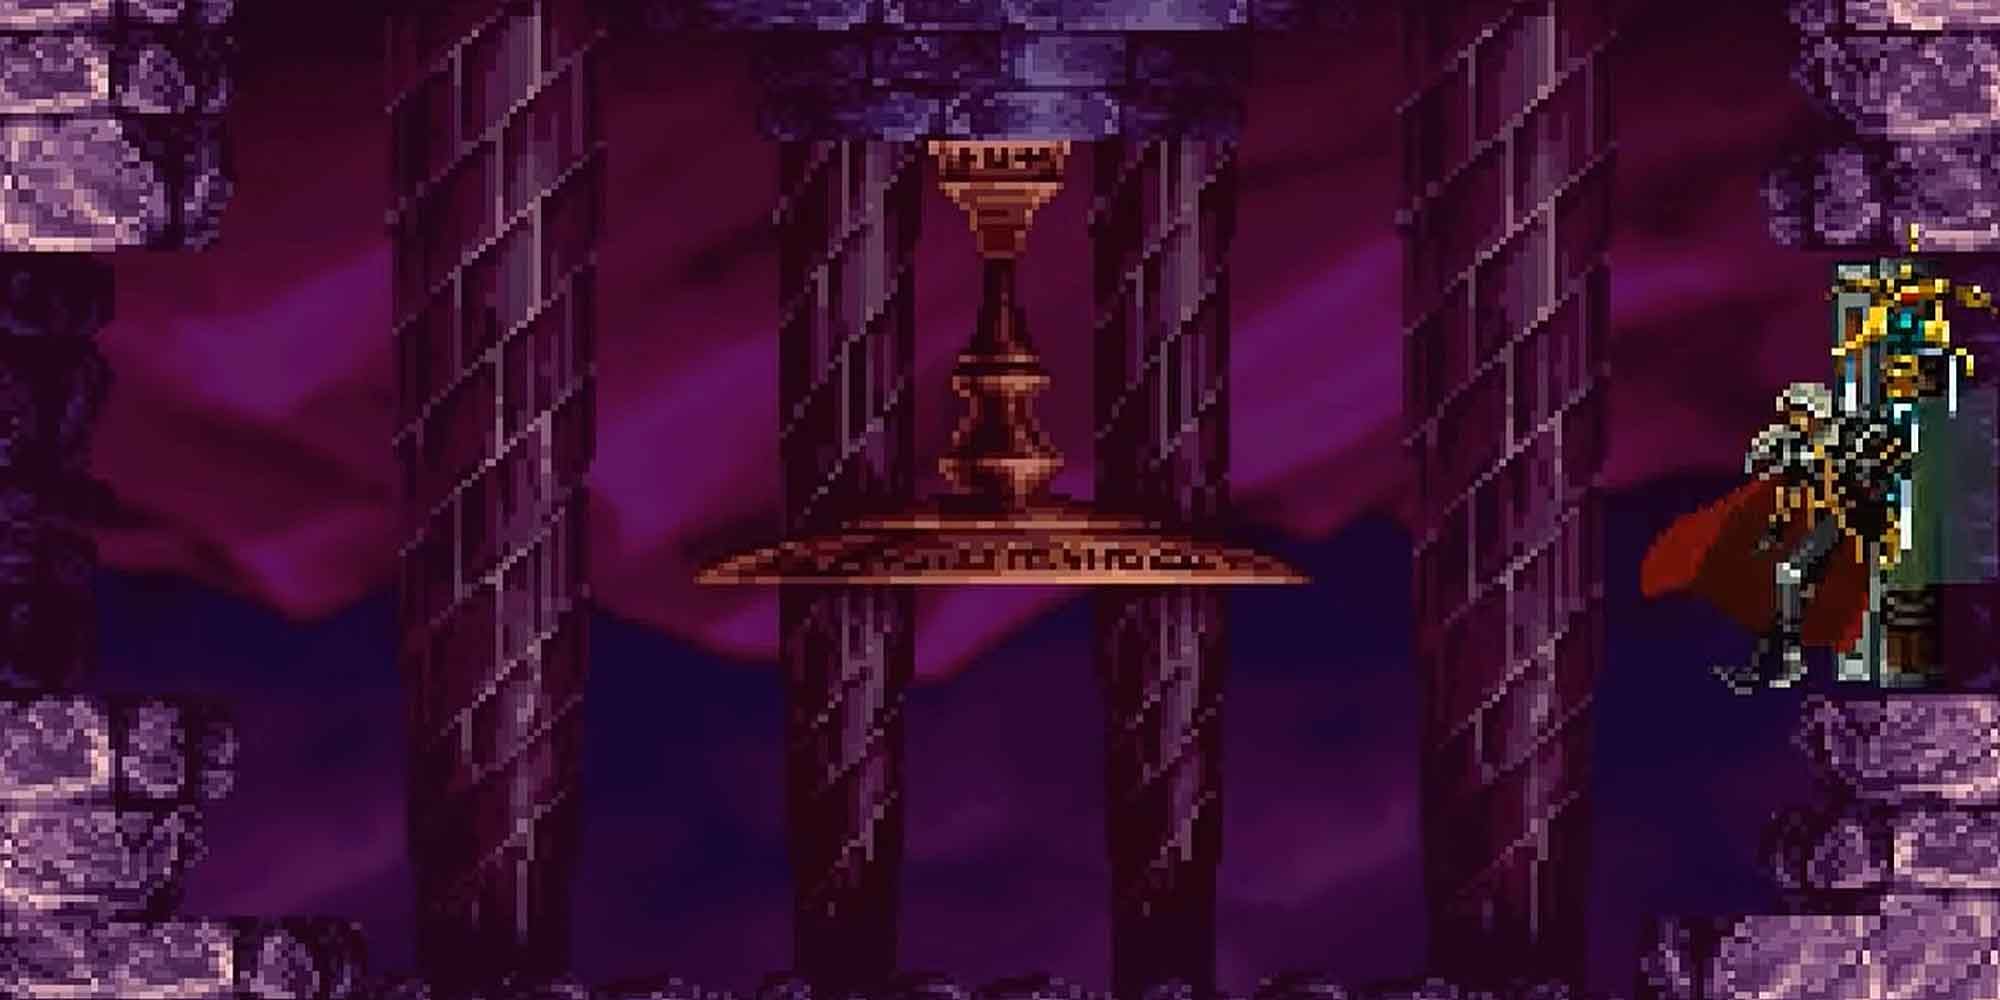 Exploring the inverted castle in Castlevania Symphony of the Night